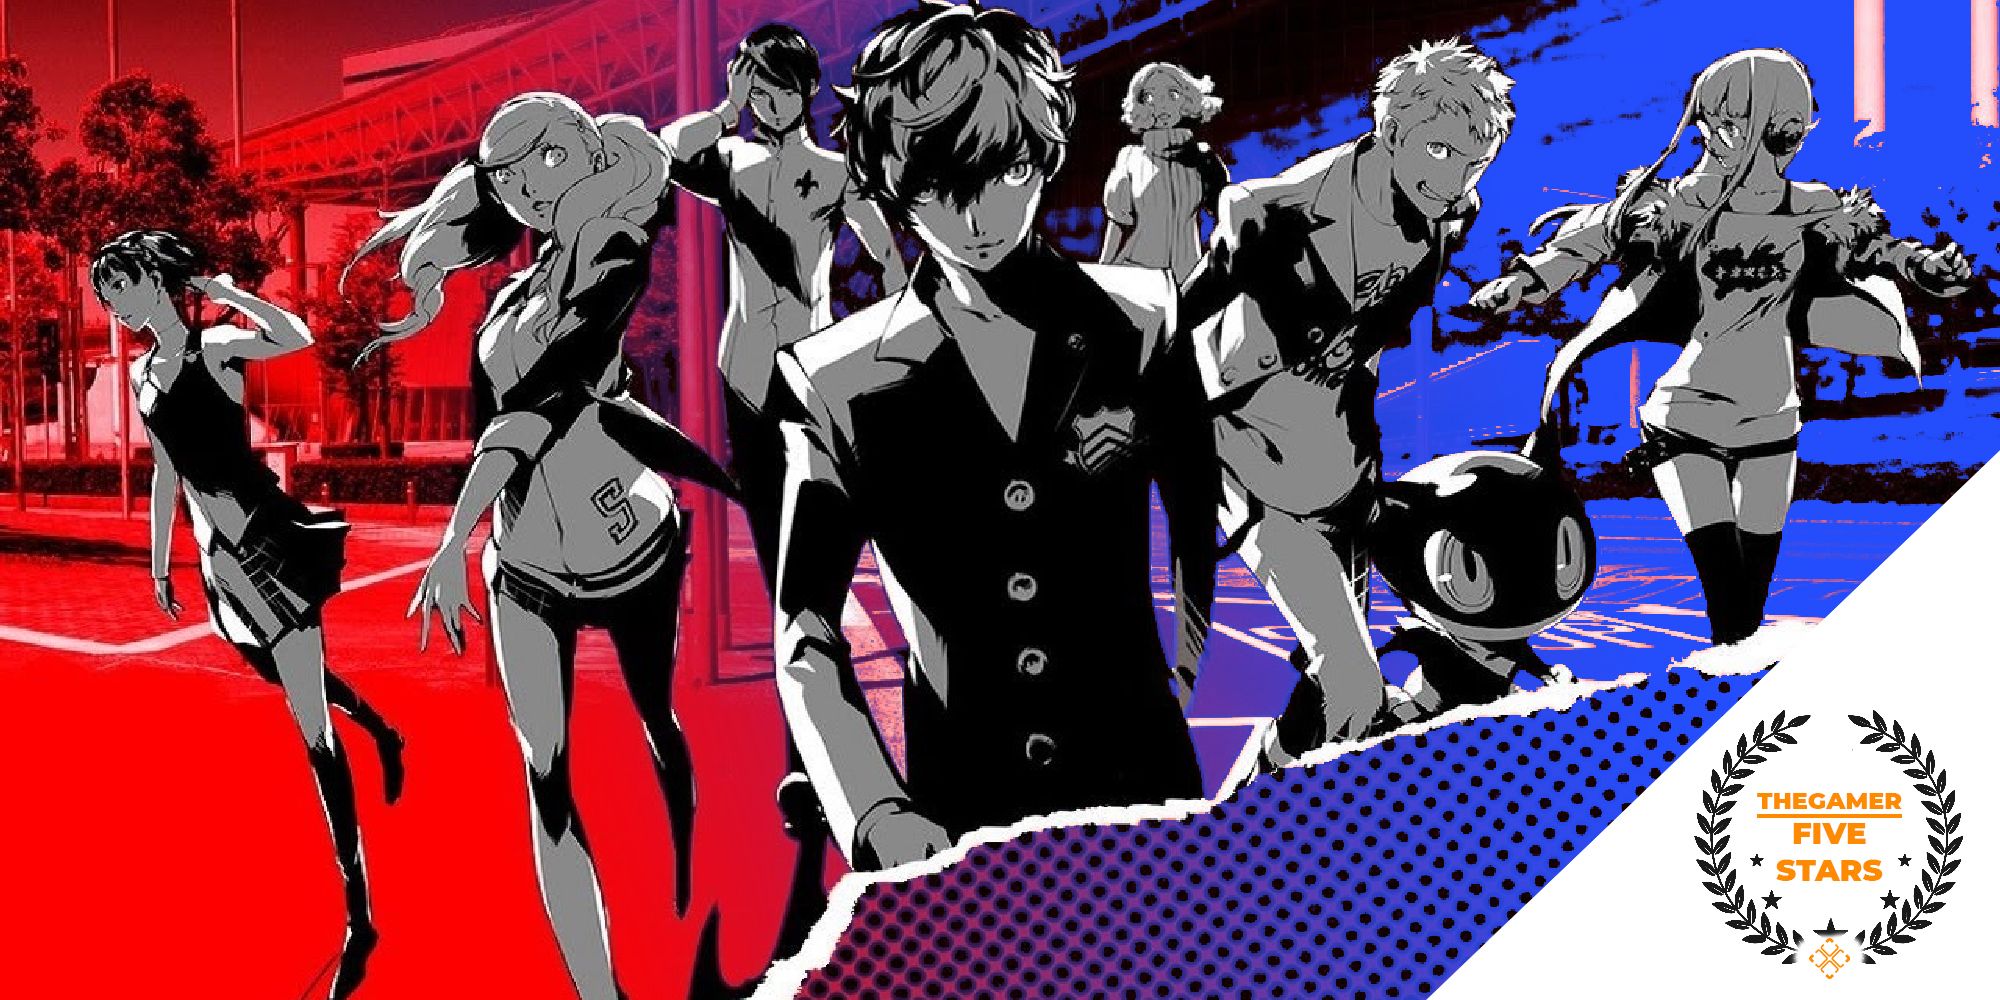 Persona 5 royal plays great on switch? - Metacritic review overview! 